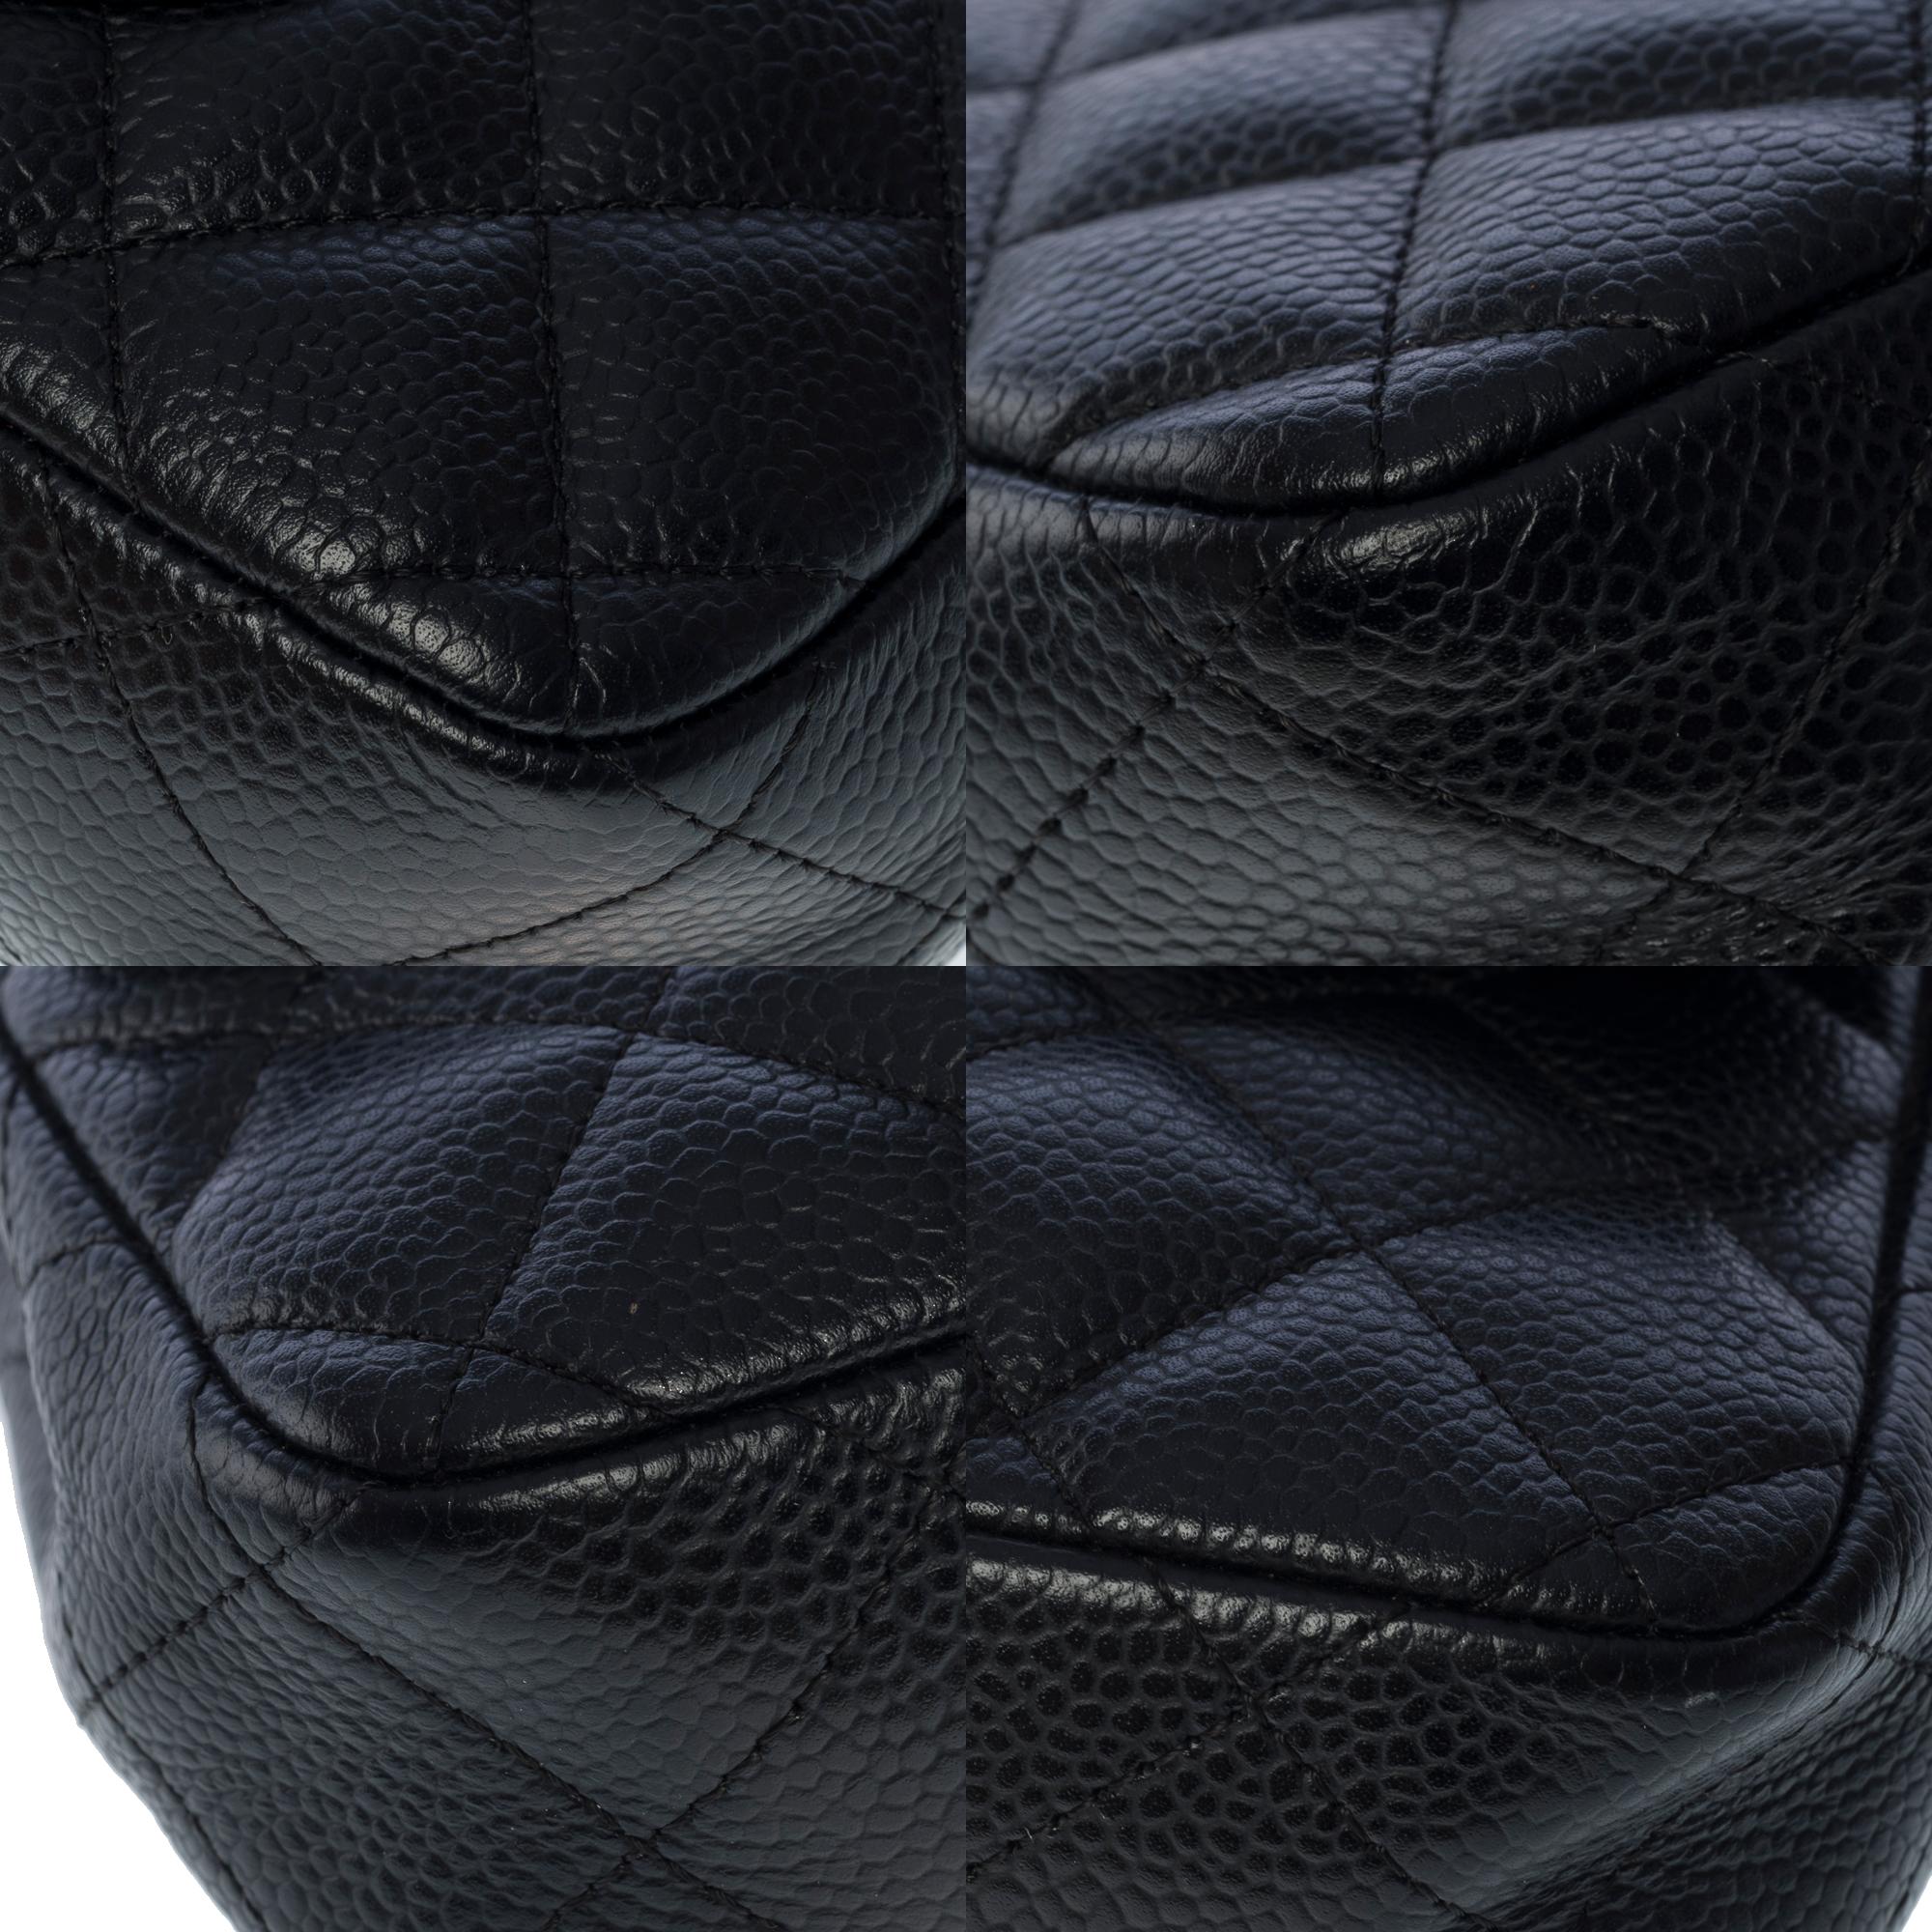 Chanel Classic Baguette shoulder bag in black caviar quilted leather , SHW 7